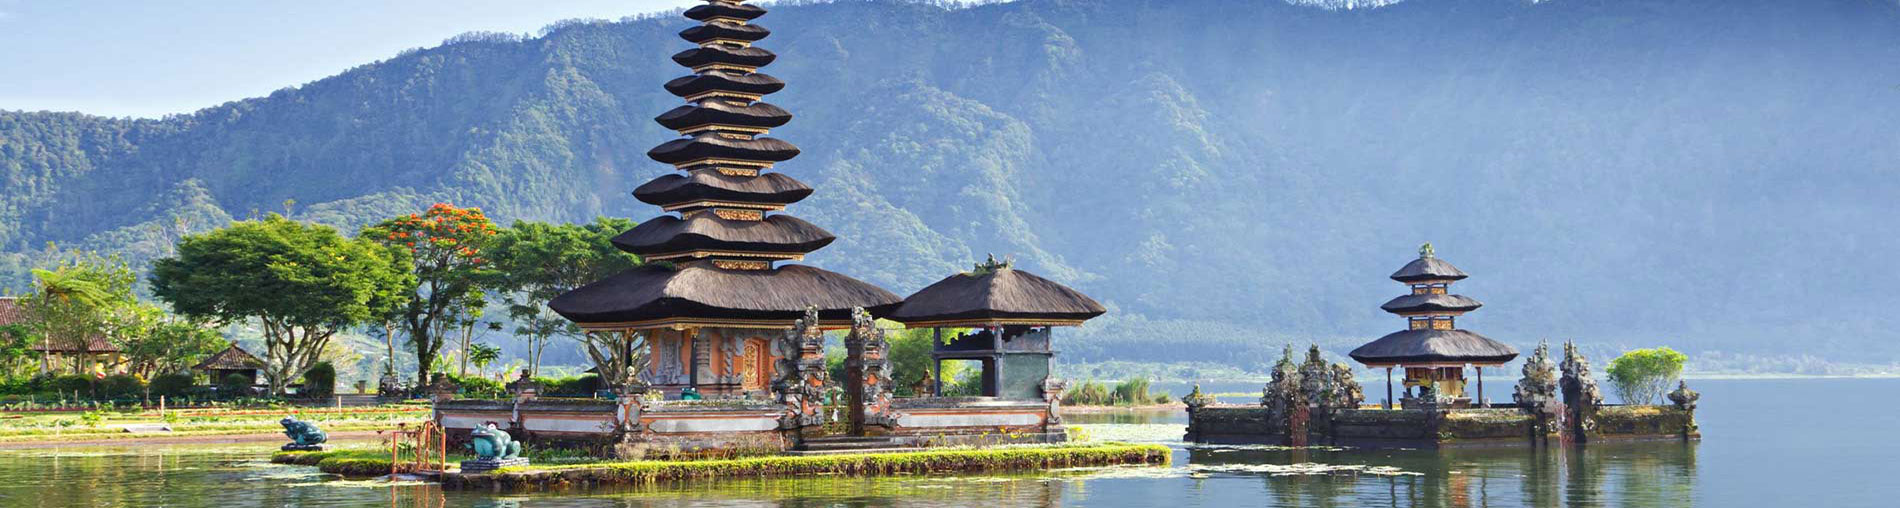 Bali, Indonesia Tour Package From India